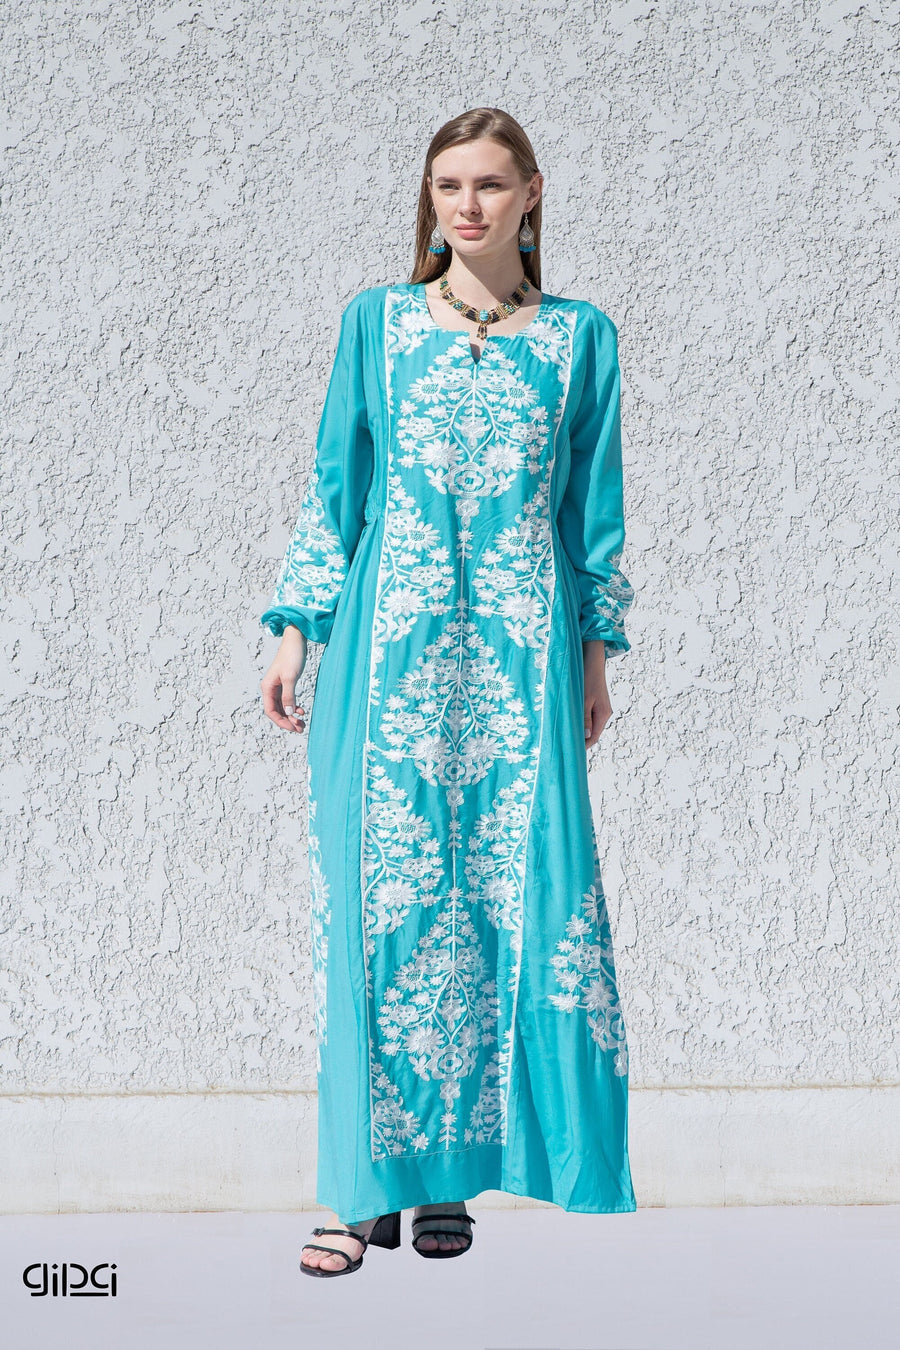 Elegant Turquoise embroidered kaftan dress, Cotton caftan women, Long sleeve caftan, Chic embroidered caftan, High quality Egyptian cotton